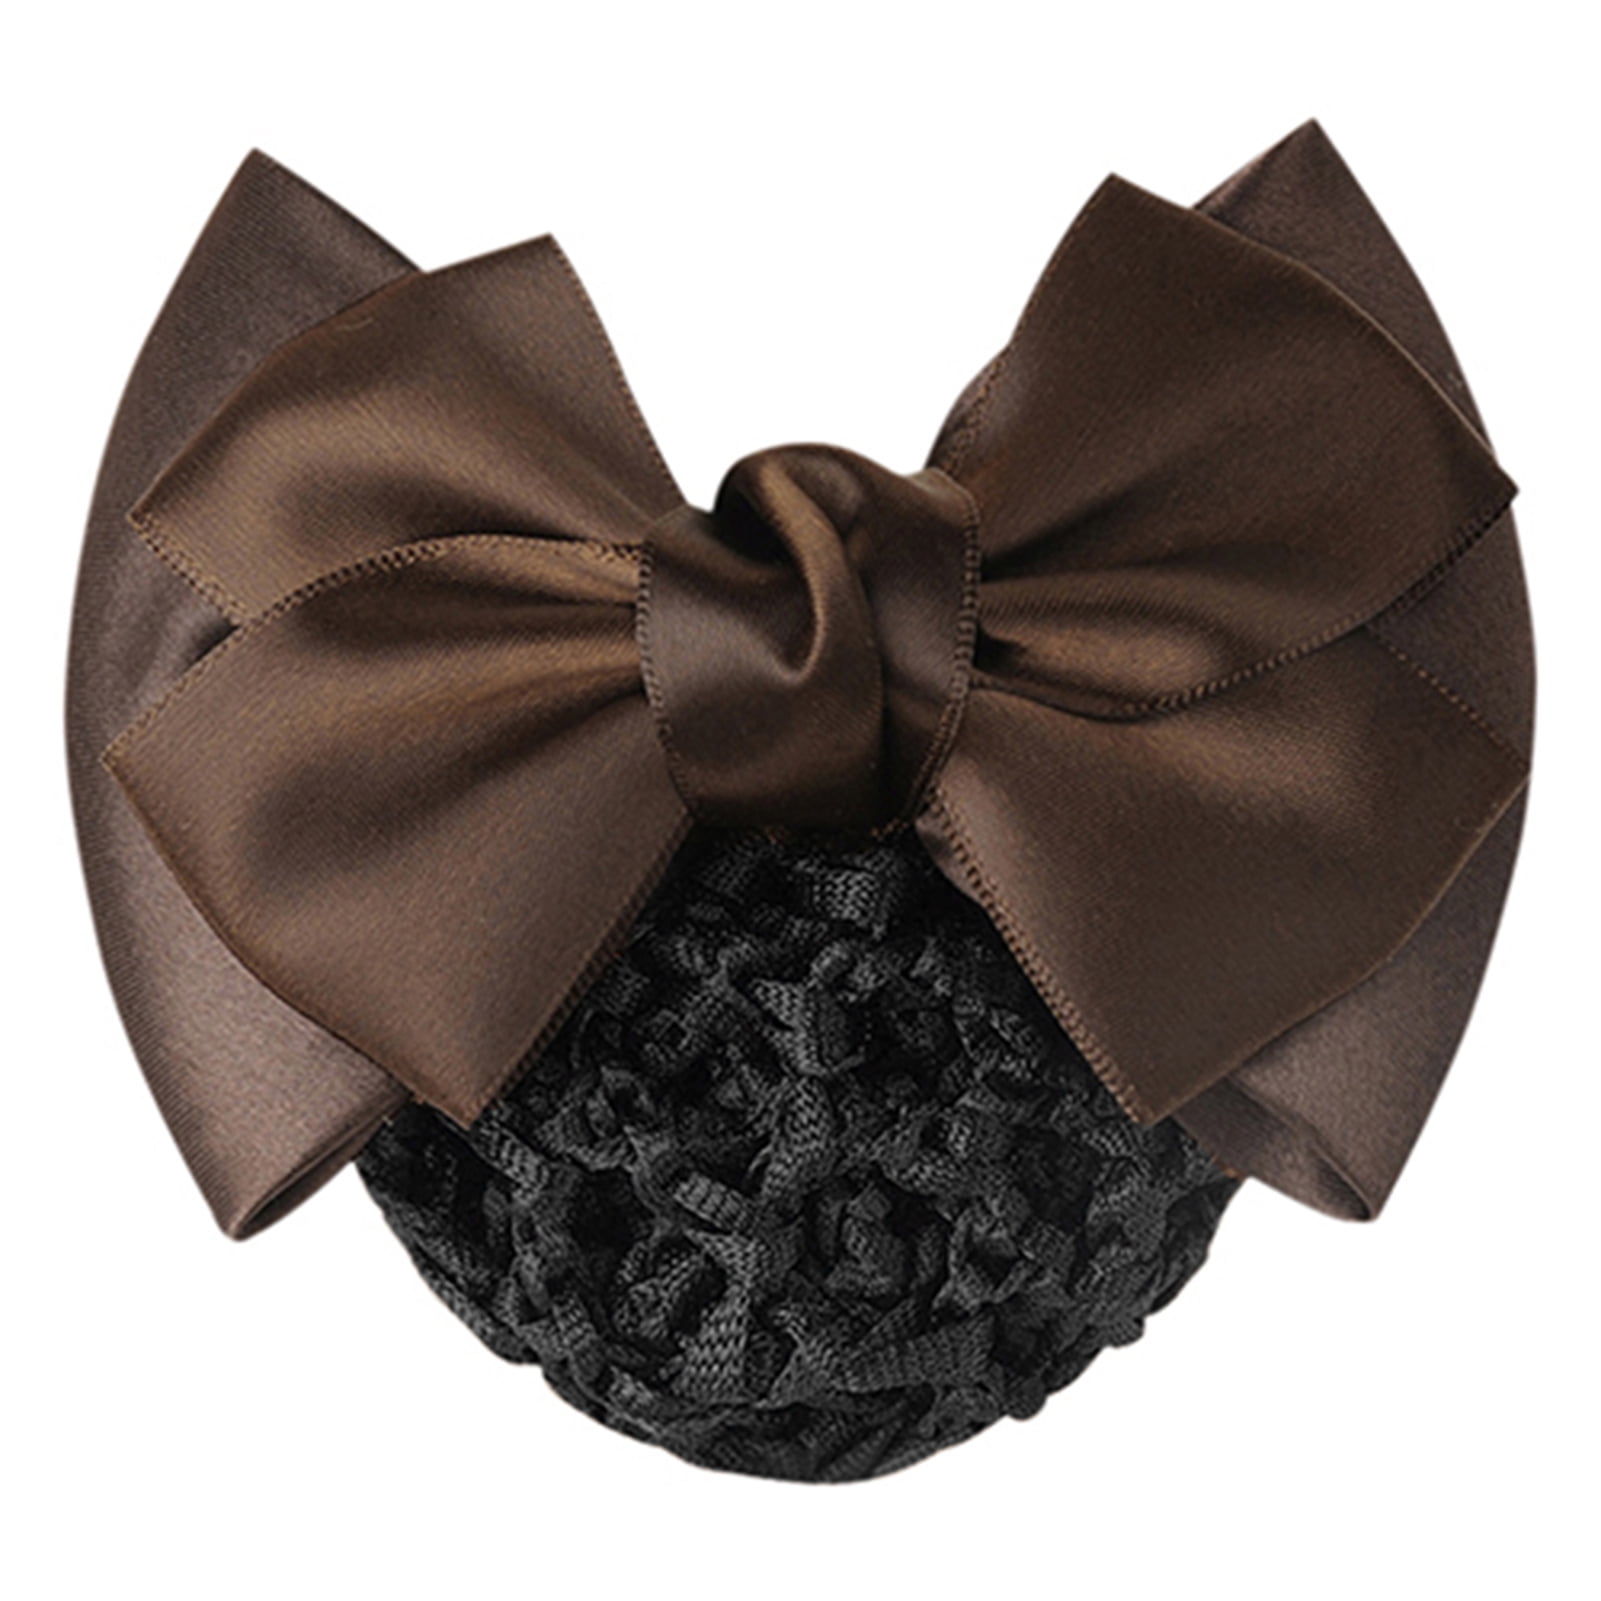 NEW Women Satin Bow Hair Clips with Snood Net Barrette Bun Cover Assorted Colors 